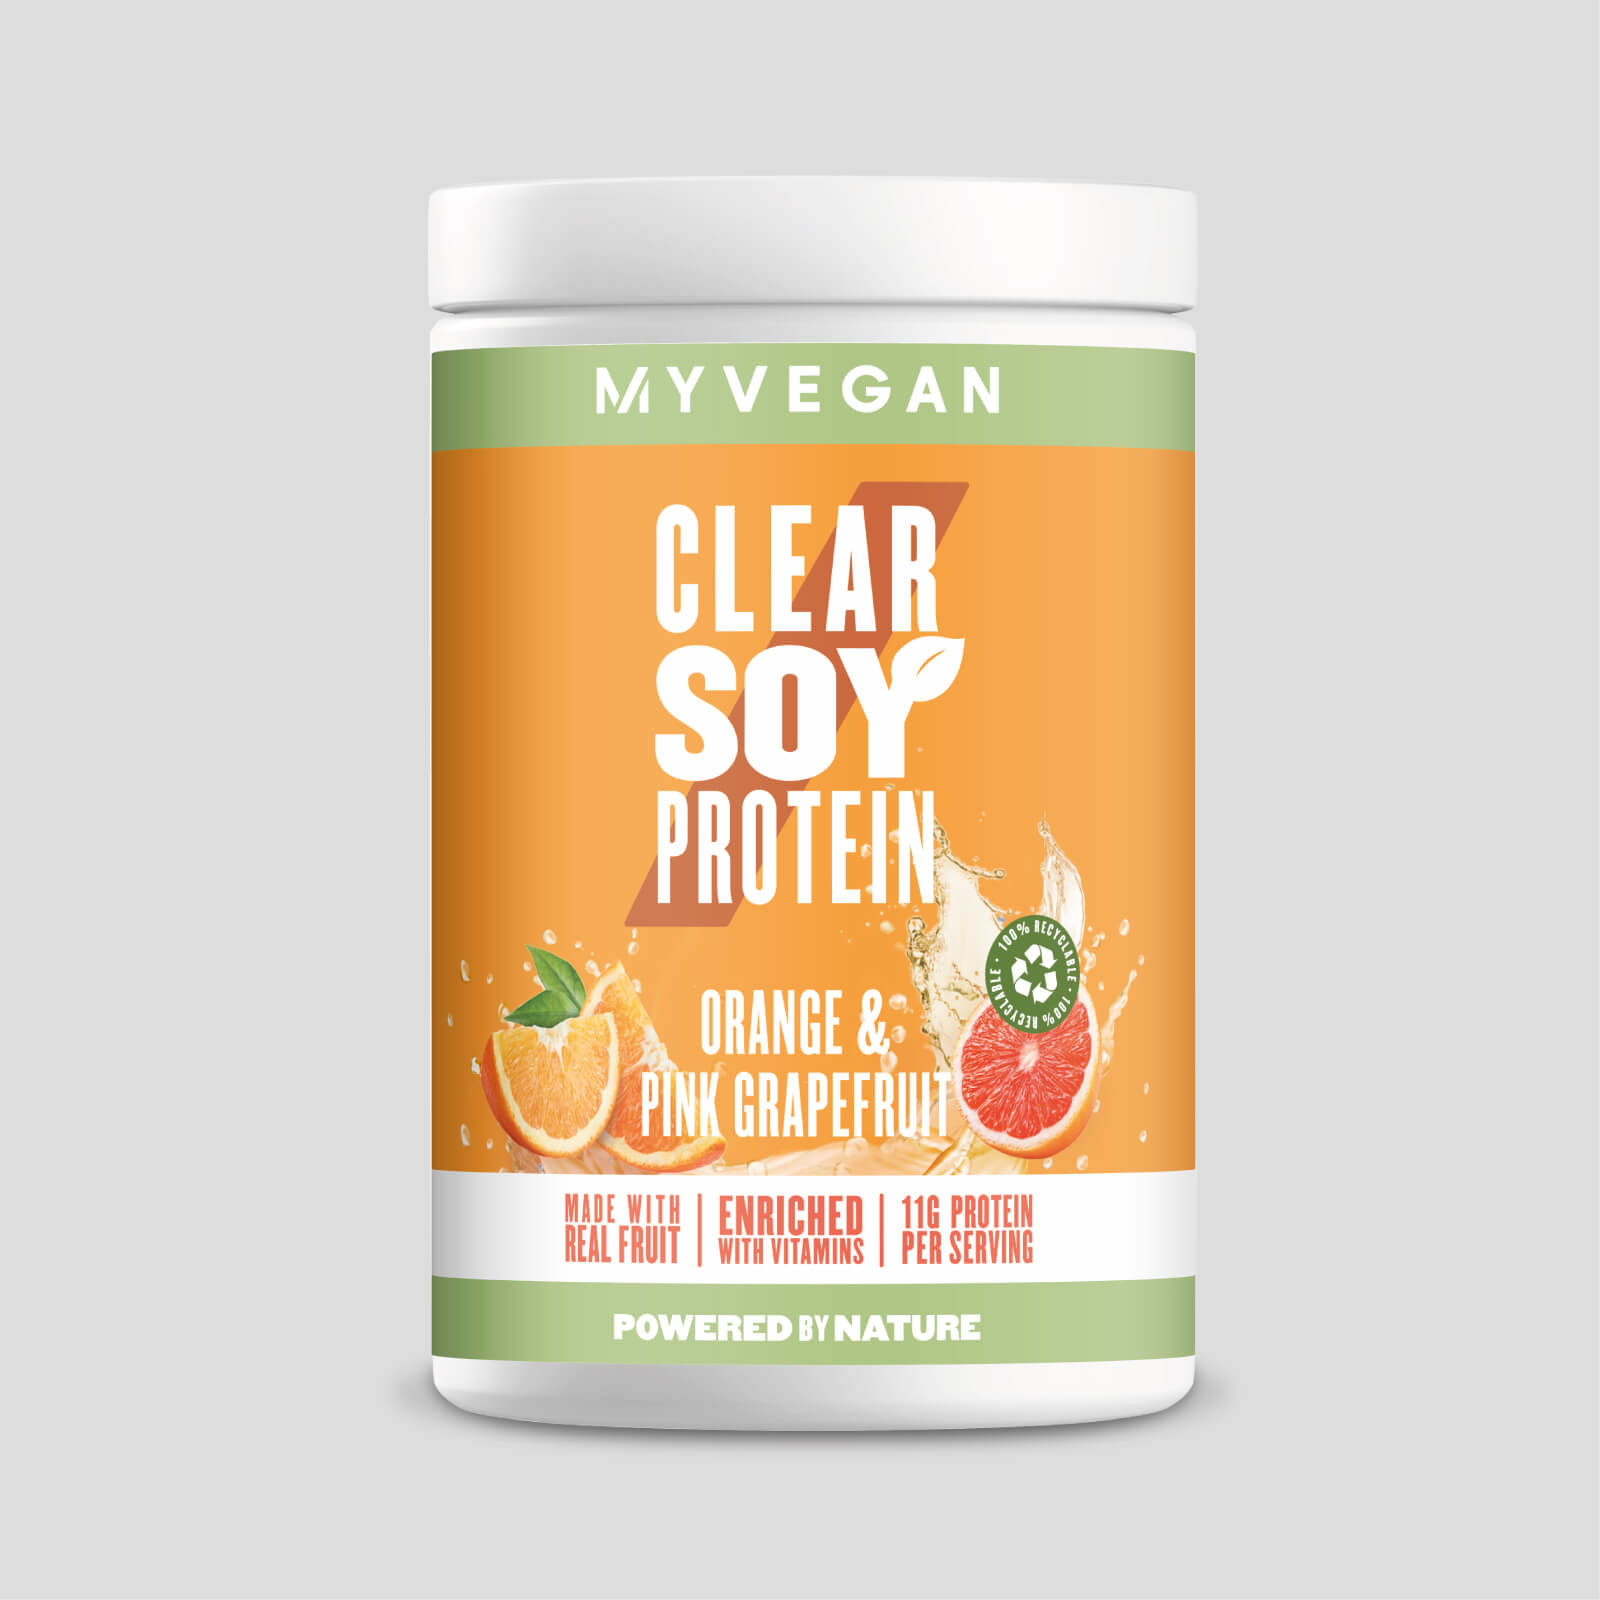 Myprotein Clear Soy Protein - 340g - Orange and Pink Grapefruit